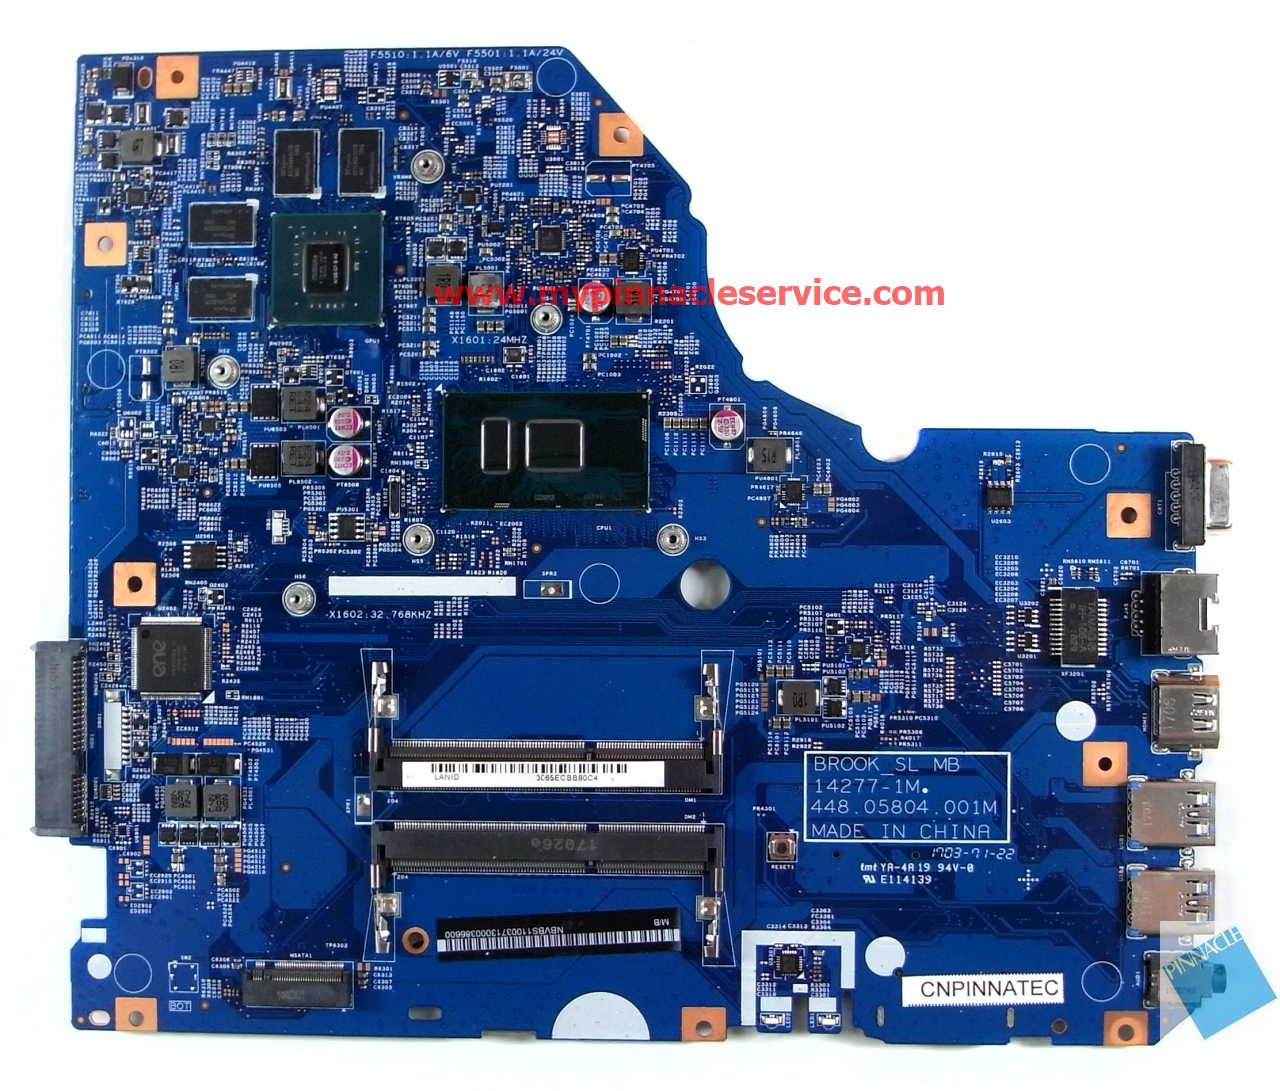 NBVBS11003 I5-6200U Motherboard For Acer Asipre E5-773G 448.05804.001M  GT940M